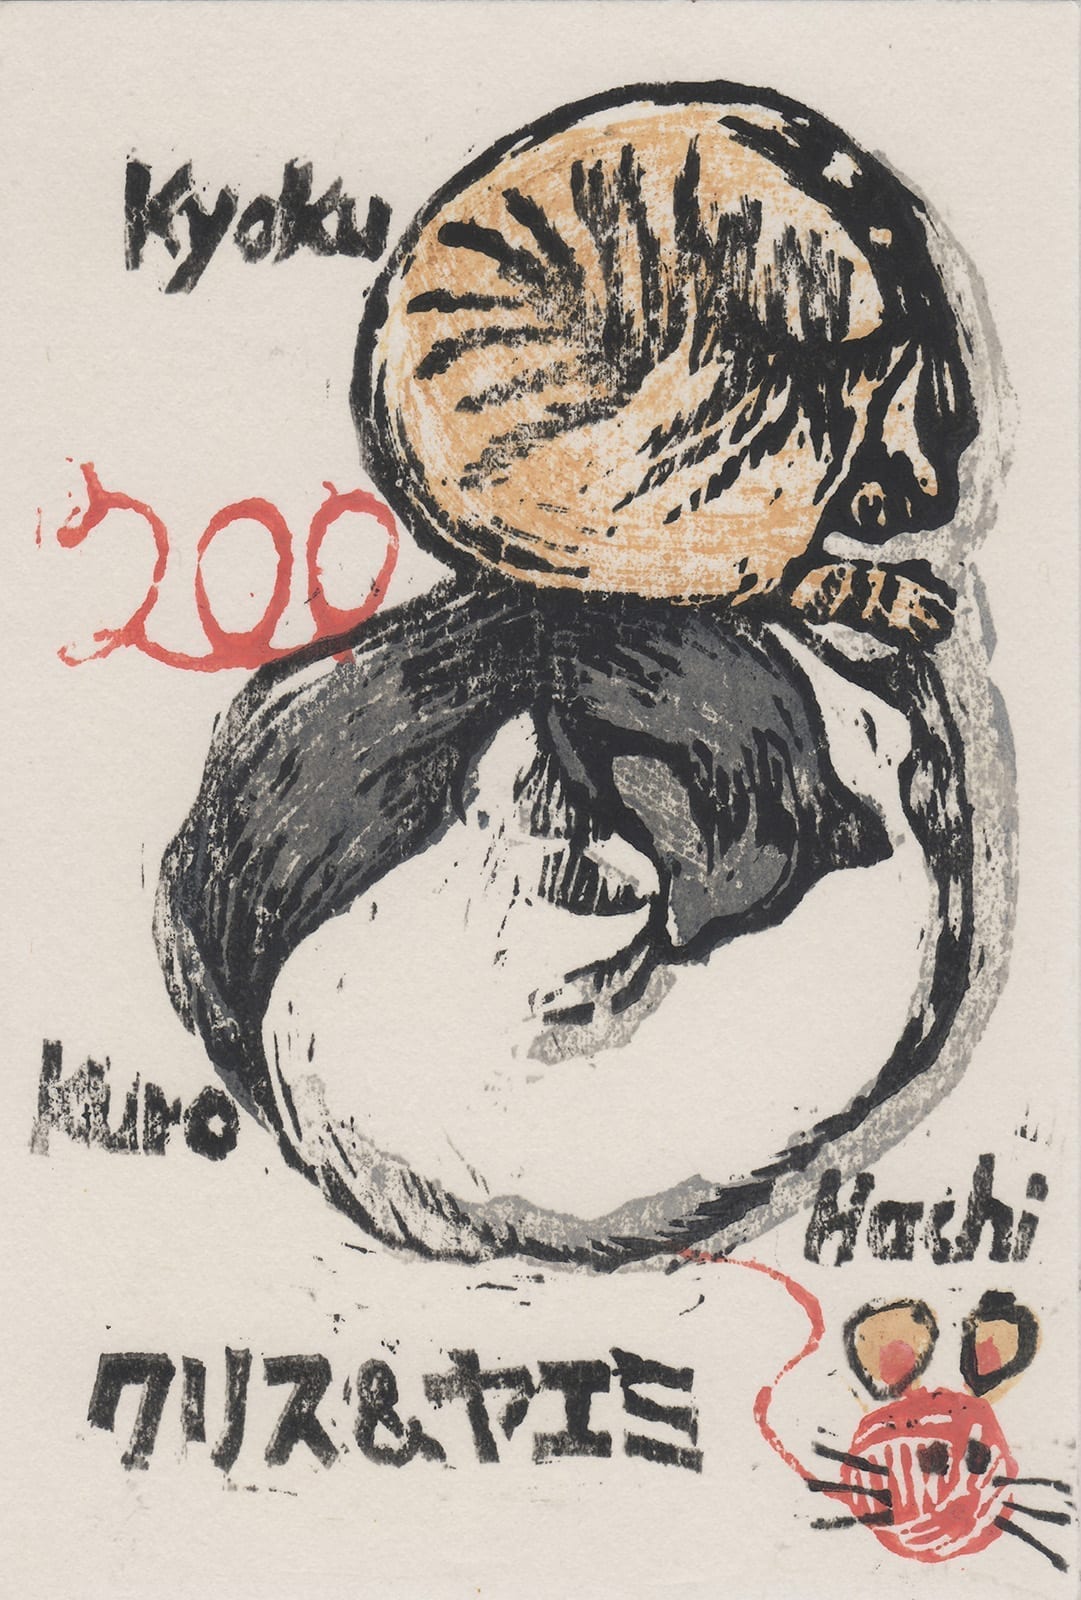 2008 (Heisei 20) New Year’s Card: Year of the Rat